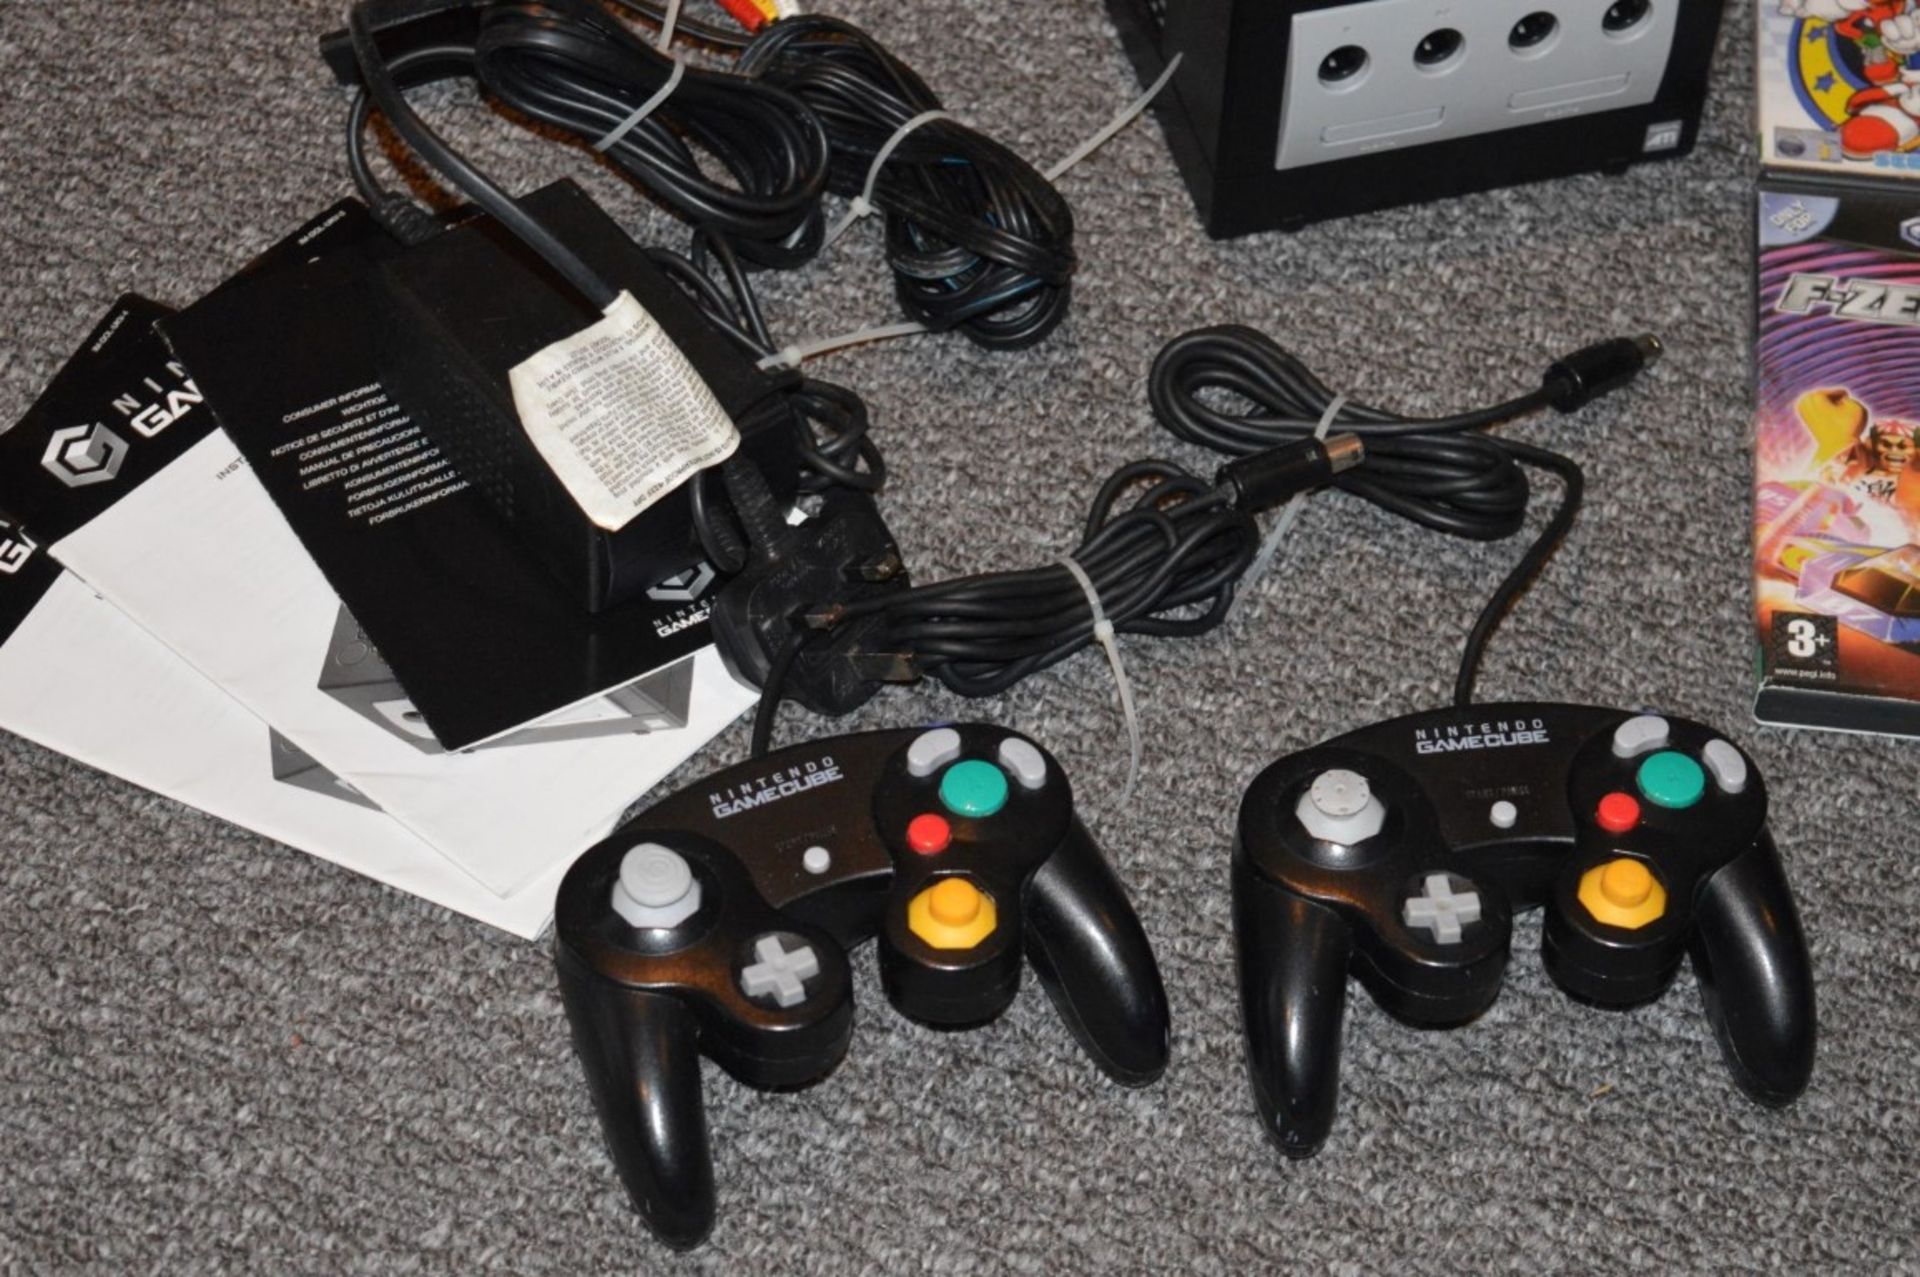 1 x Nintendo Gamecube Games Console With 2 Controllers, Power Adaptor, AV Lead, Instructions and 4 - Image 3 of 4